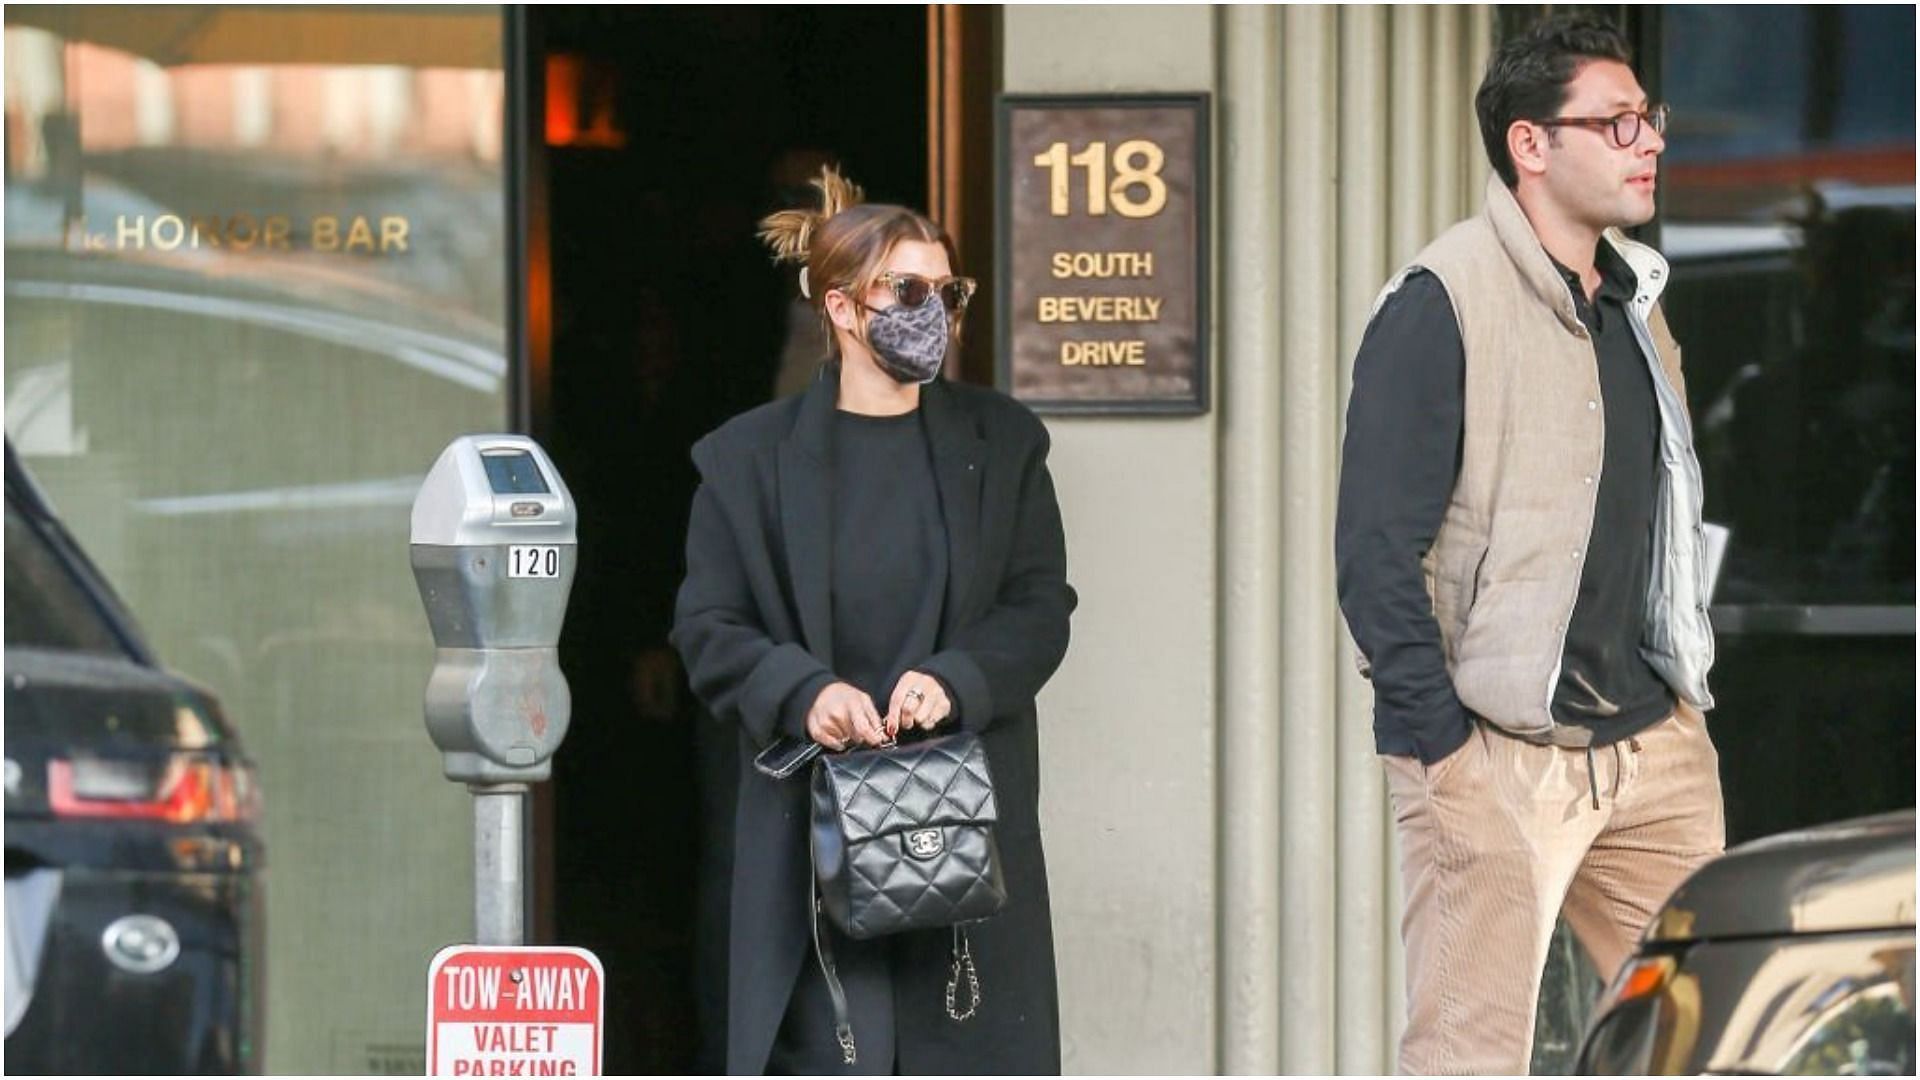 Sofia Richie and Elliot Grainge are seen on December 08, 2021 in Los Angeles, California (Image via Bellocqimages/Getty Images)